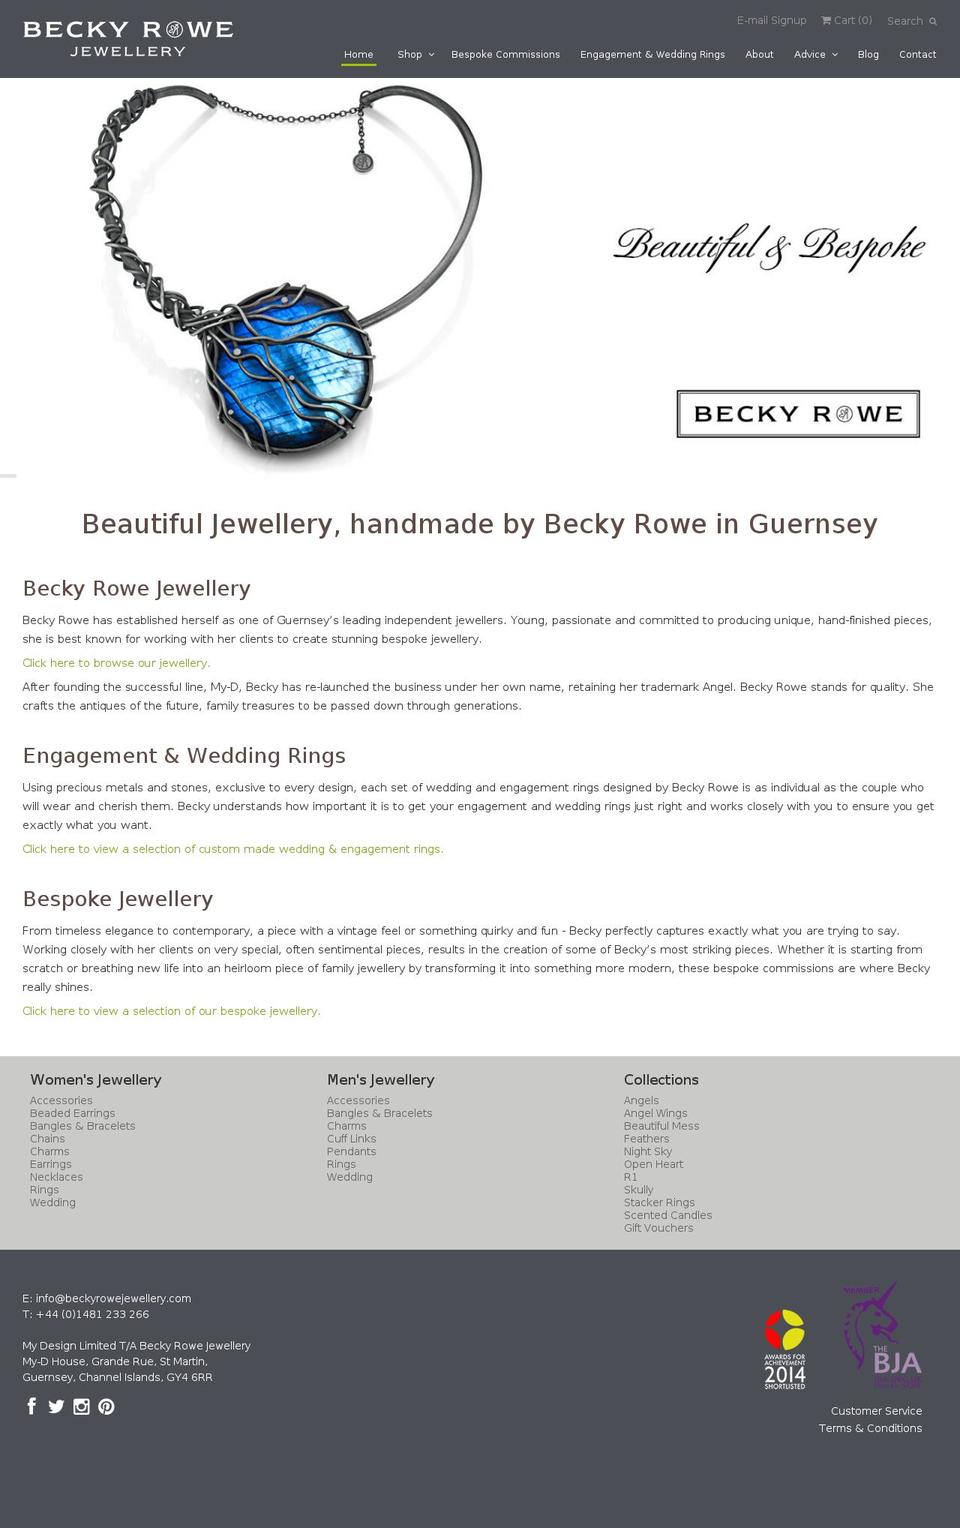 Weekend Shopify theme site example beckyrowejewellery.com